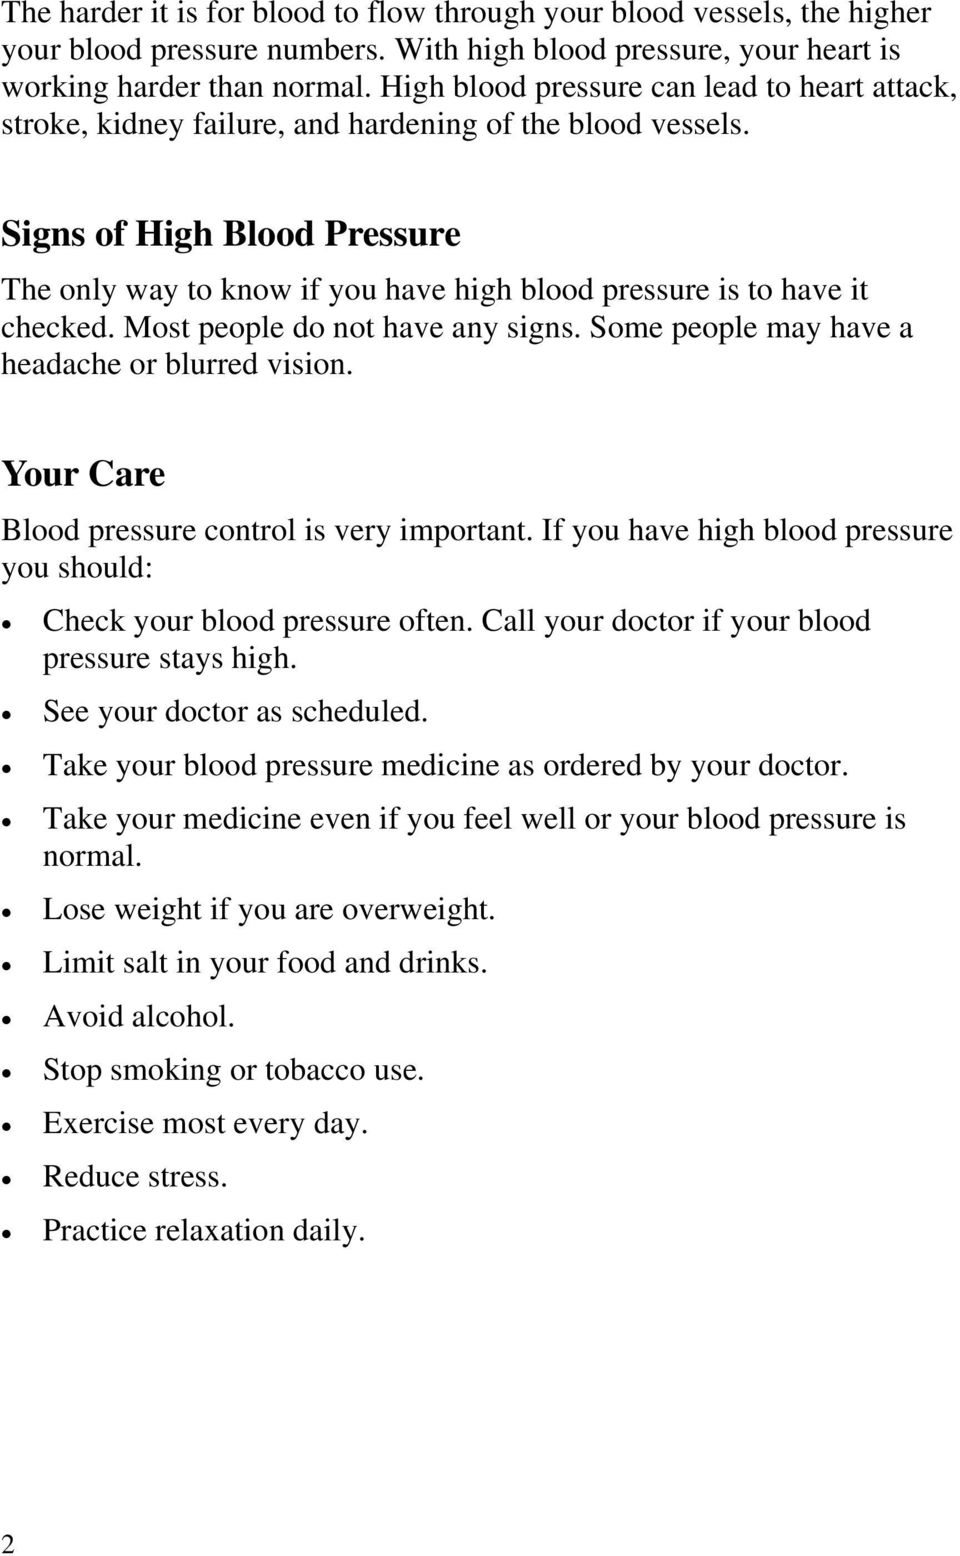 Signs of High Blood Pressure The only way to know if you have high blood pressure is to have it checked. Most people do not have any signs. Some people may have a headache or blurred vision.